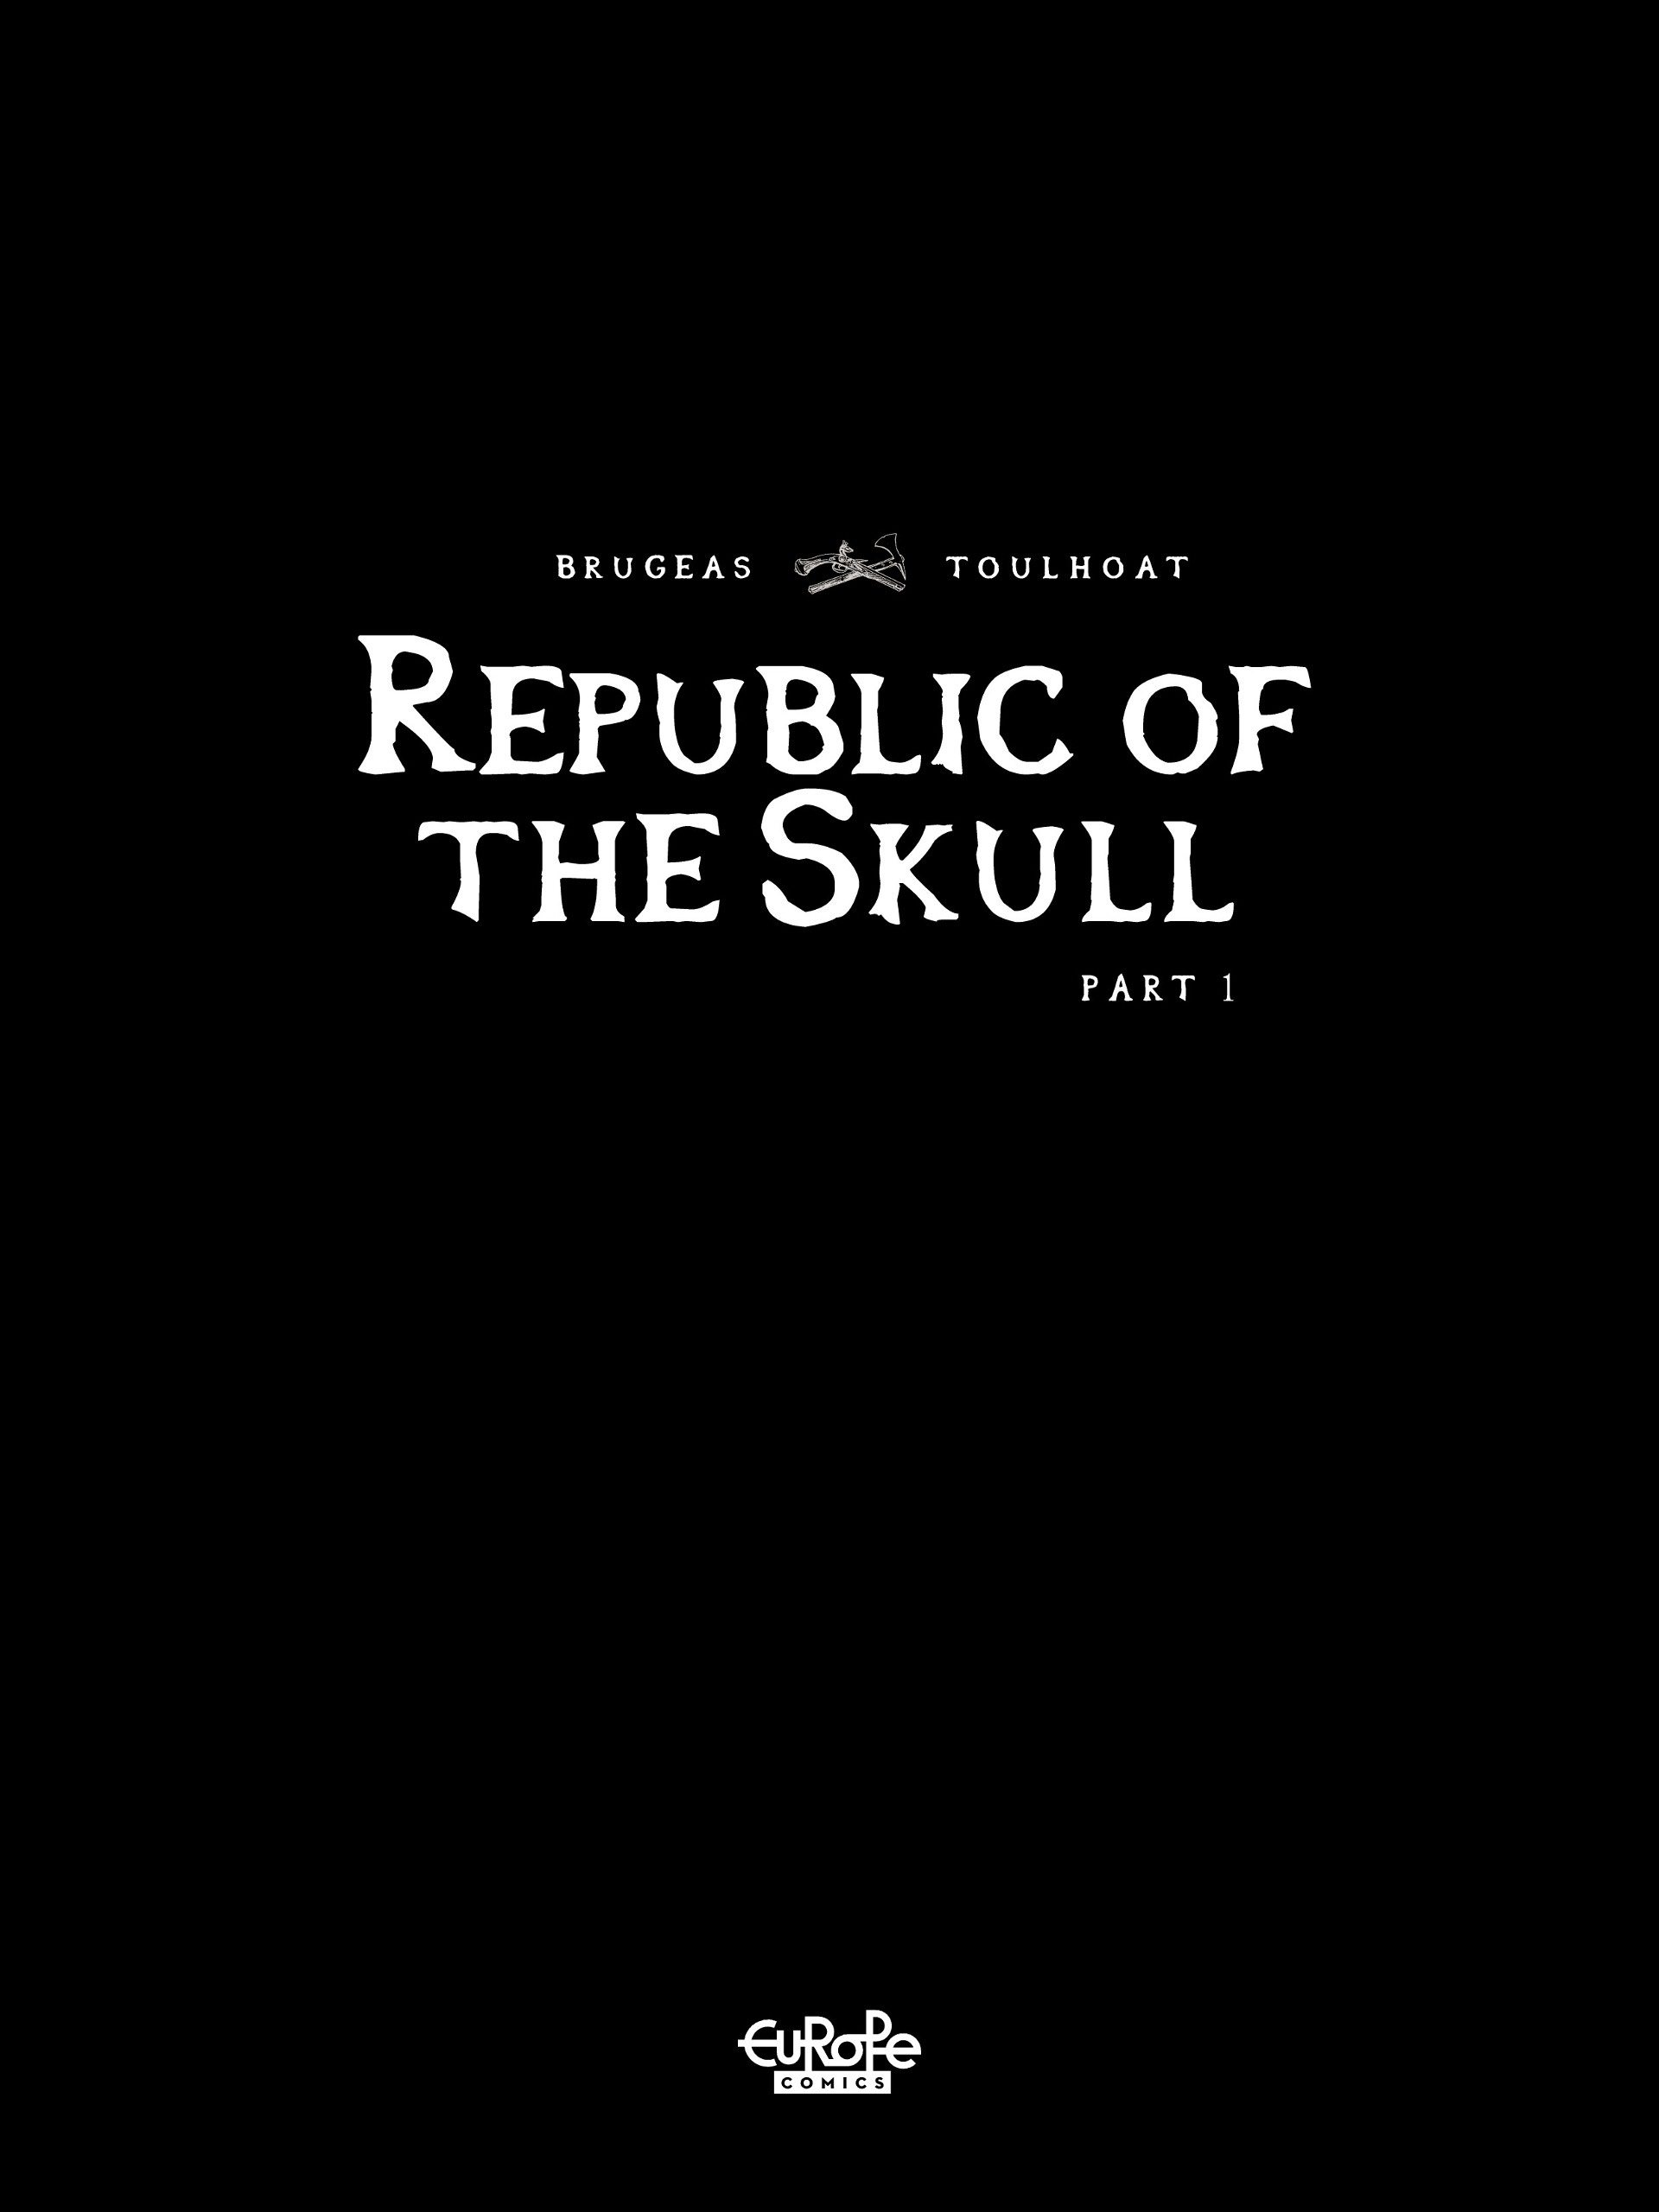 Read online Republic of the Skull comic -  Issue # TPB 1 - 2